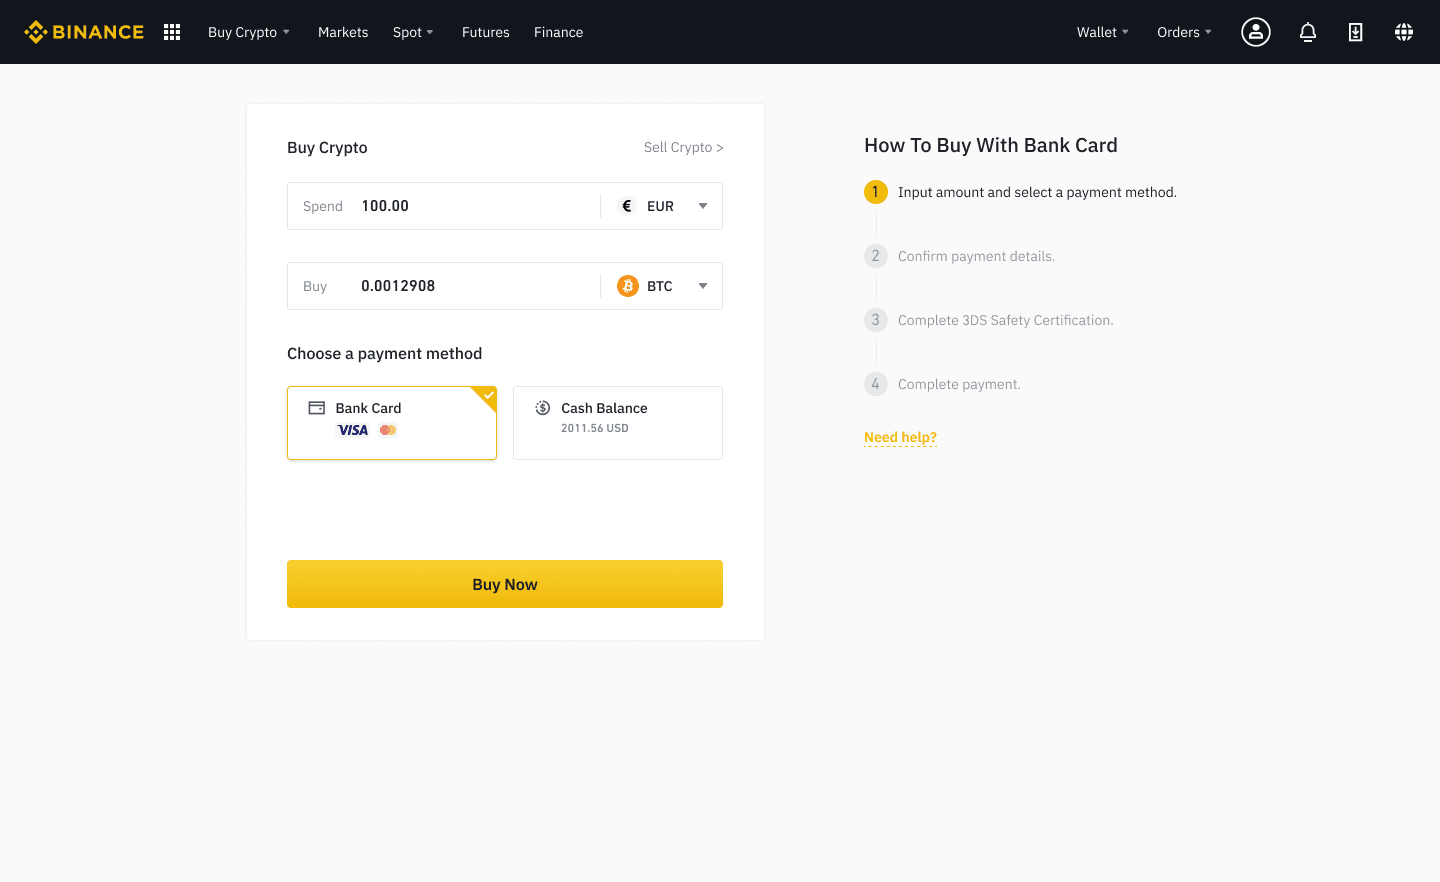 How to Buy Crypto on Binance with Debit/Credit Card via Web and Mobile App